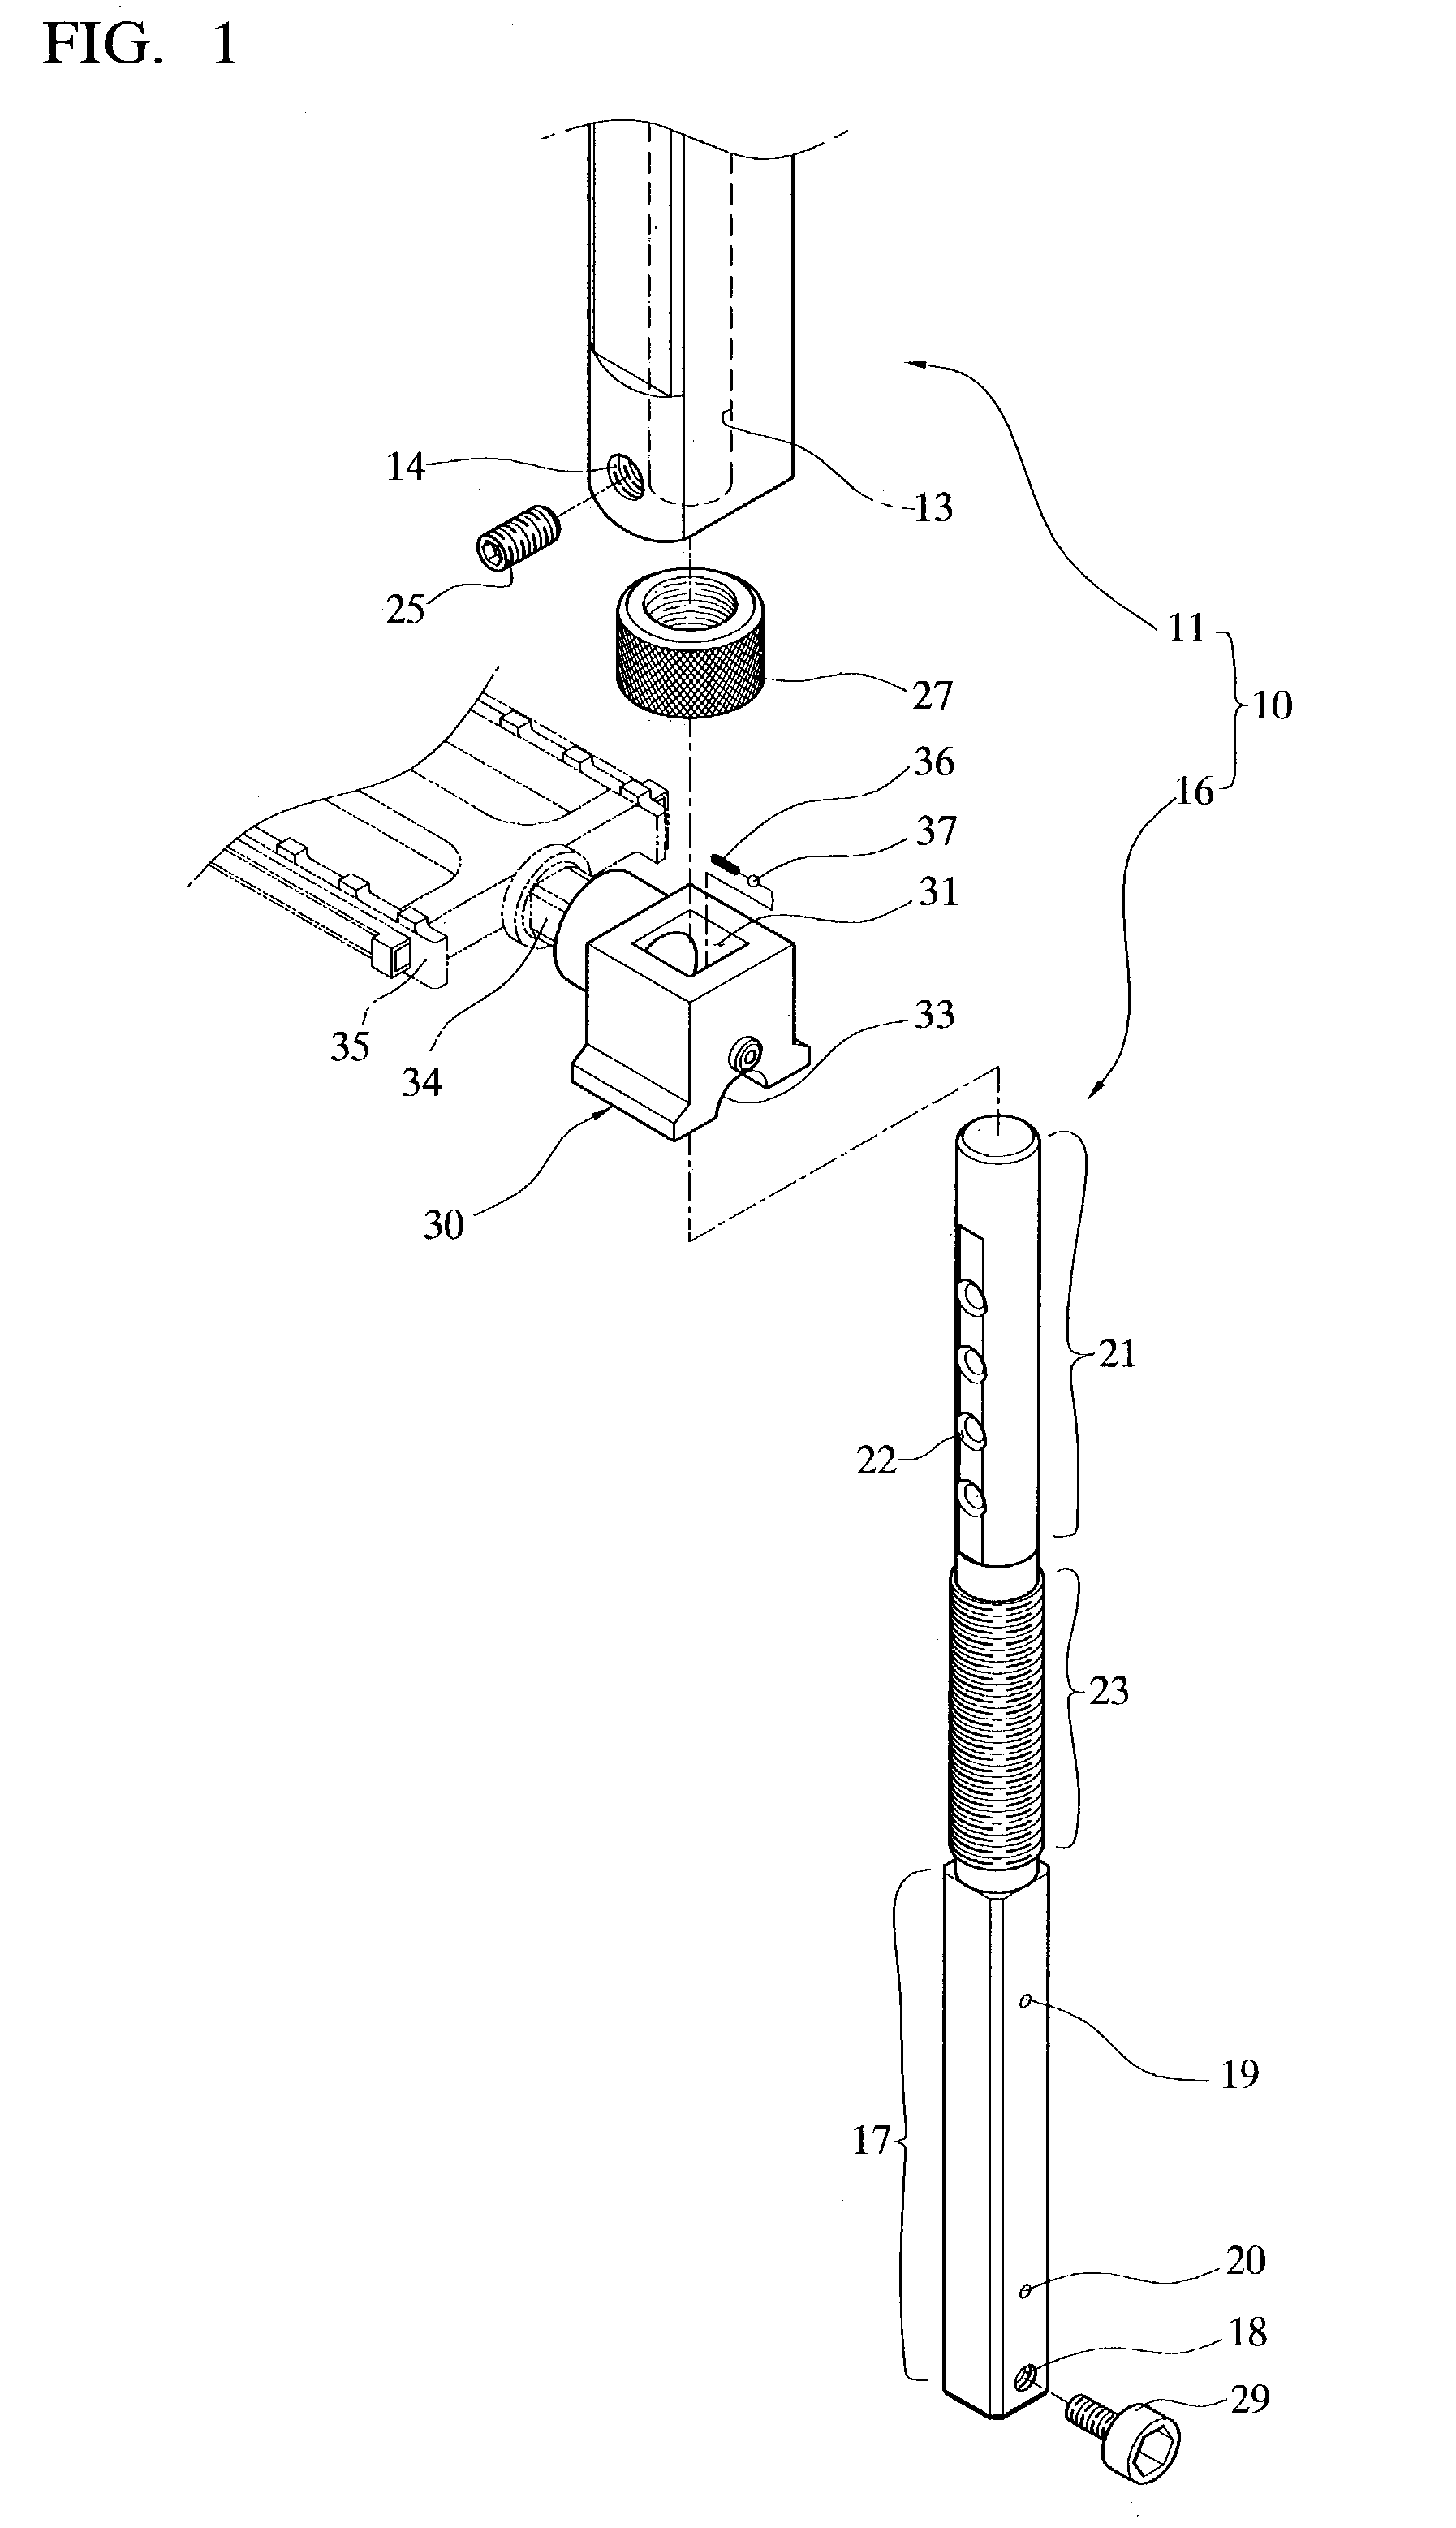 Transmission for a bicycle pedal